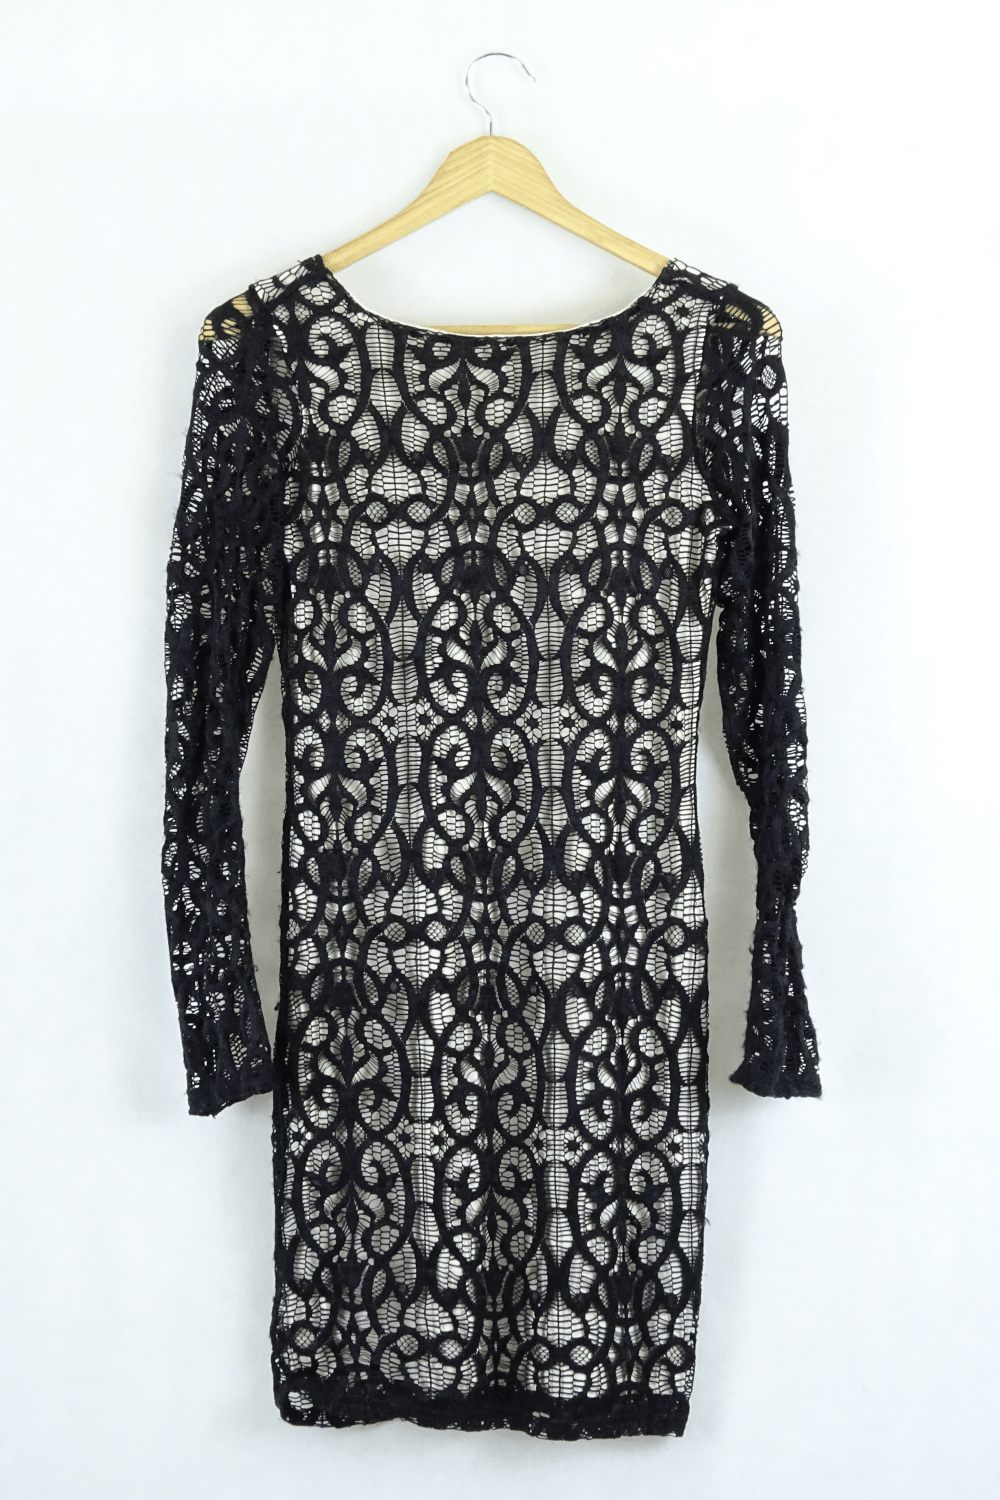 Asos Black And White Lace Dress 10